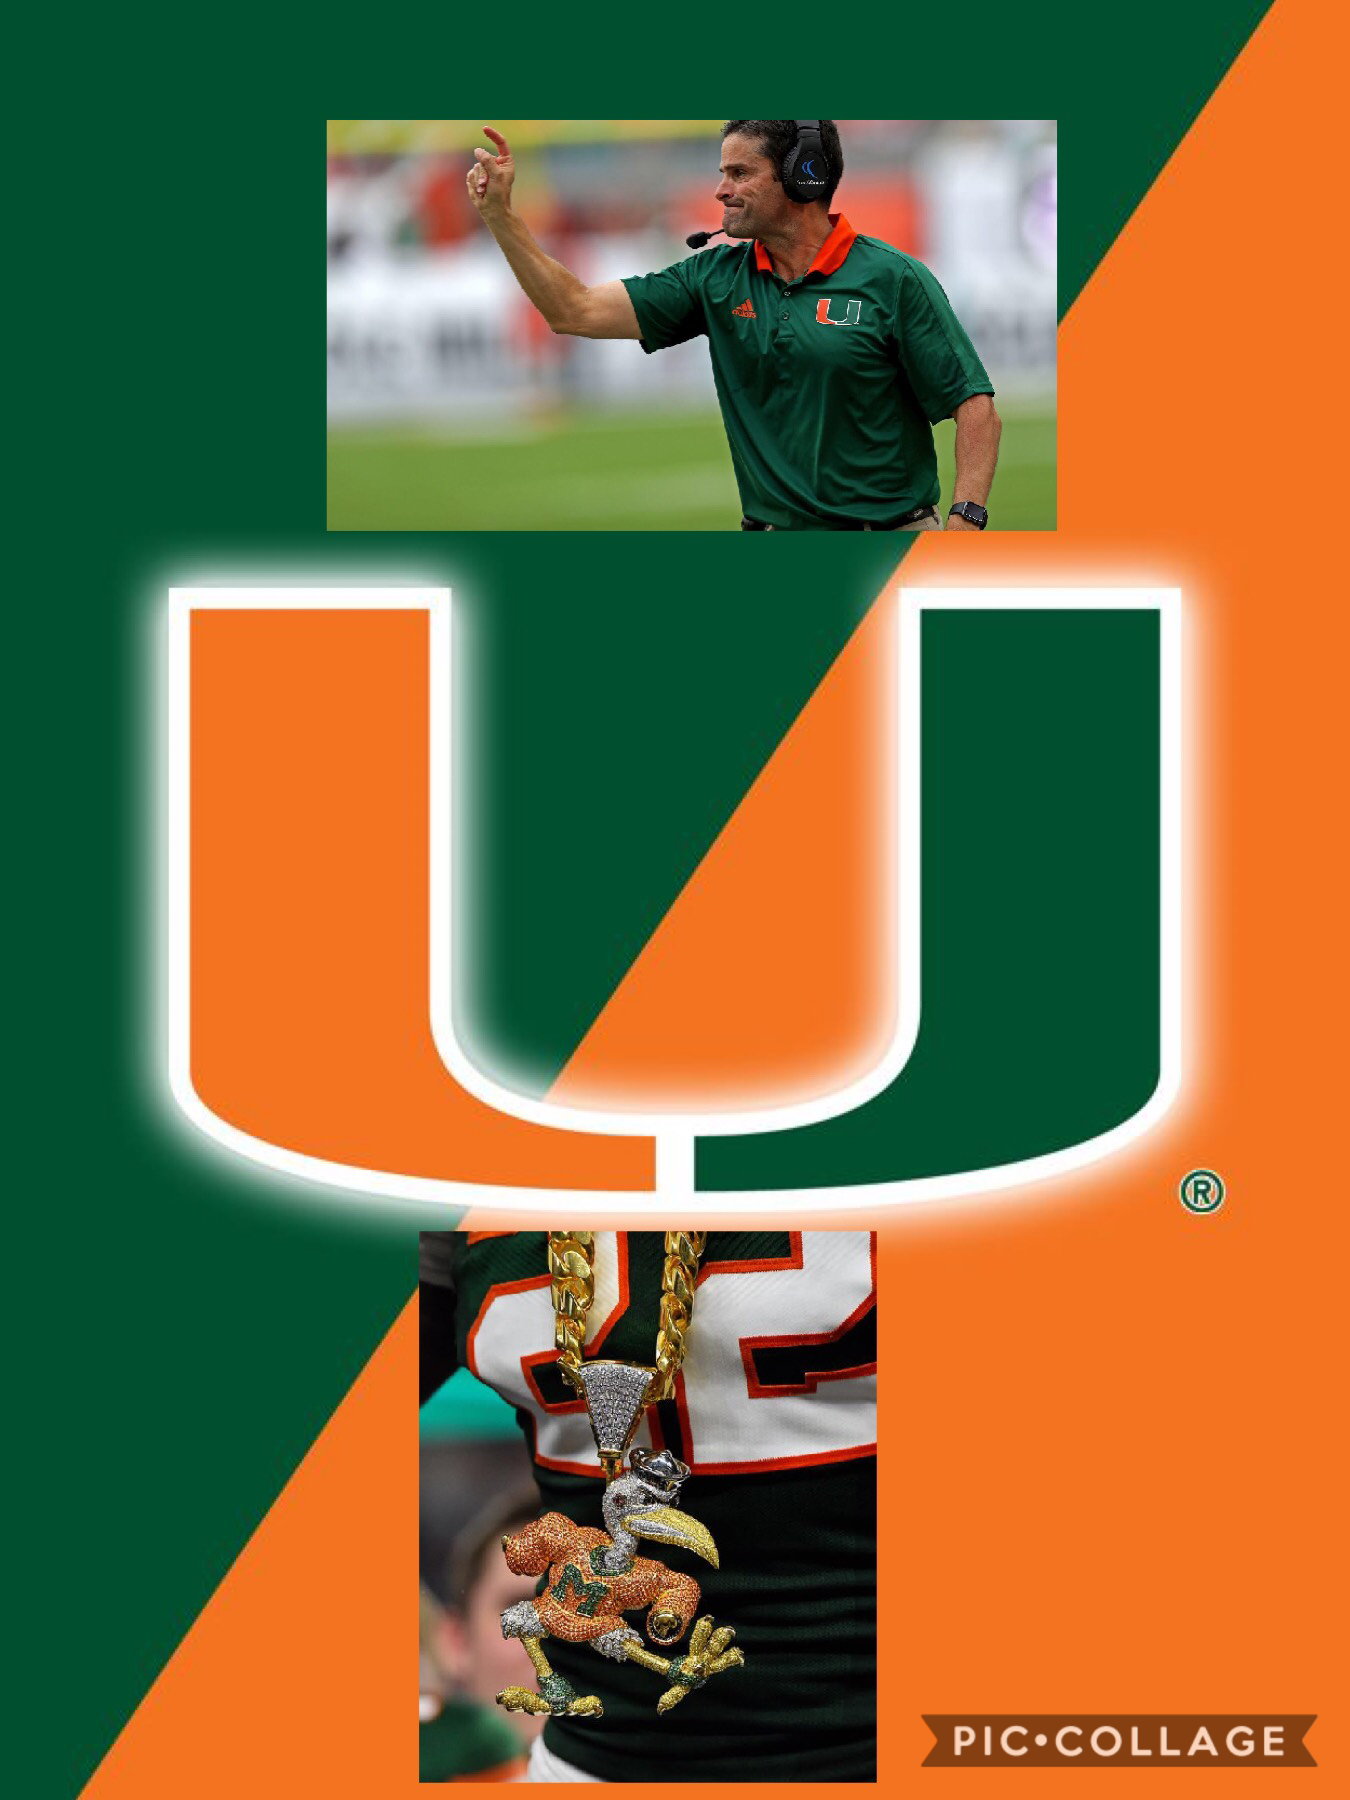 Manny Diaz our previous defensive coordinator will be our new head coach. Like for the Turnover Chain.